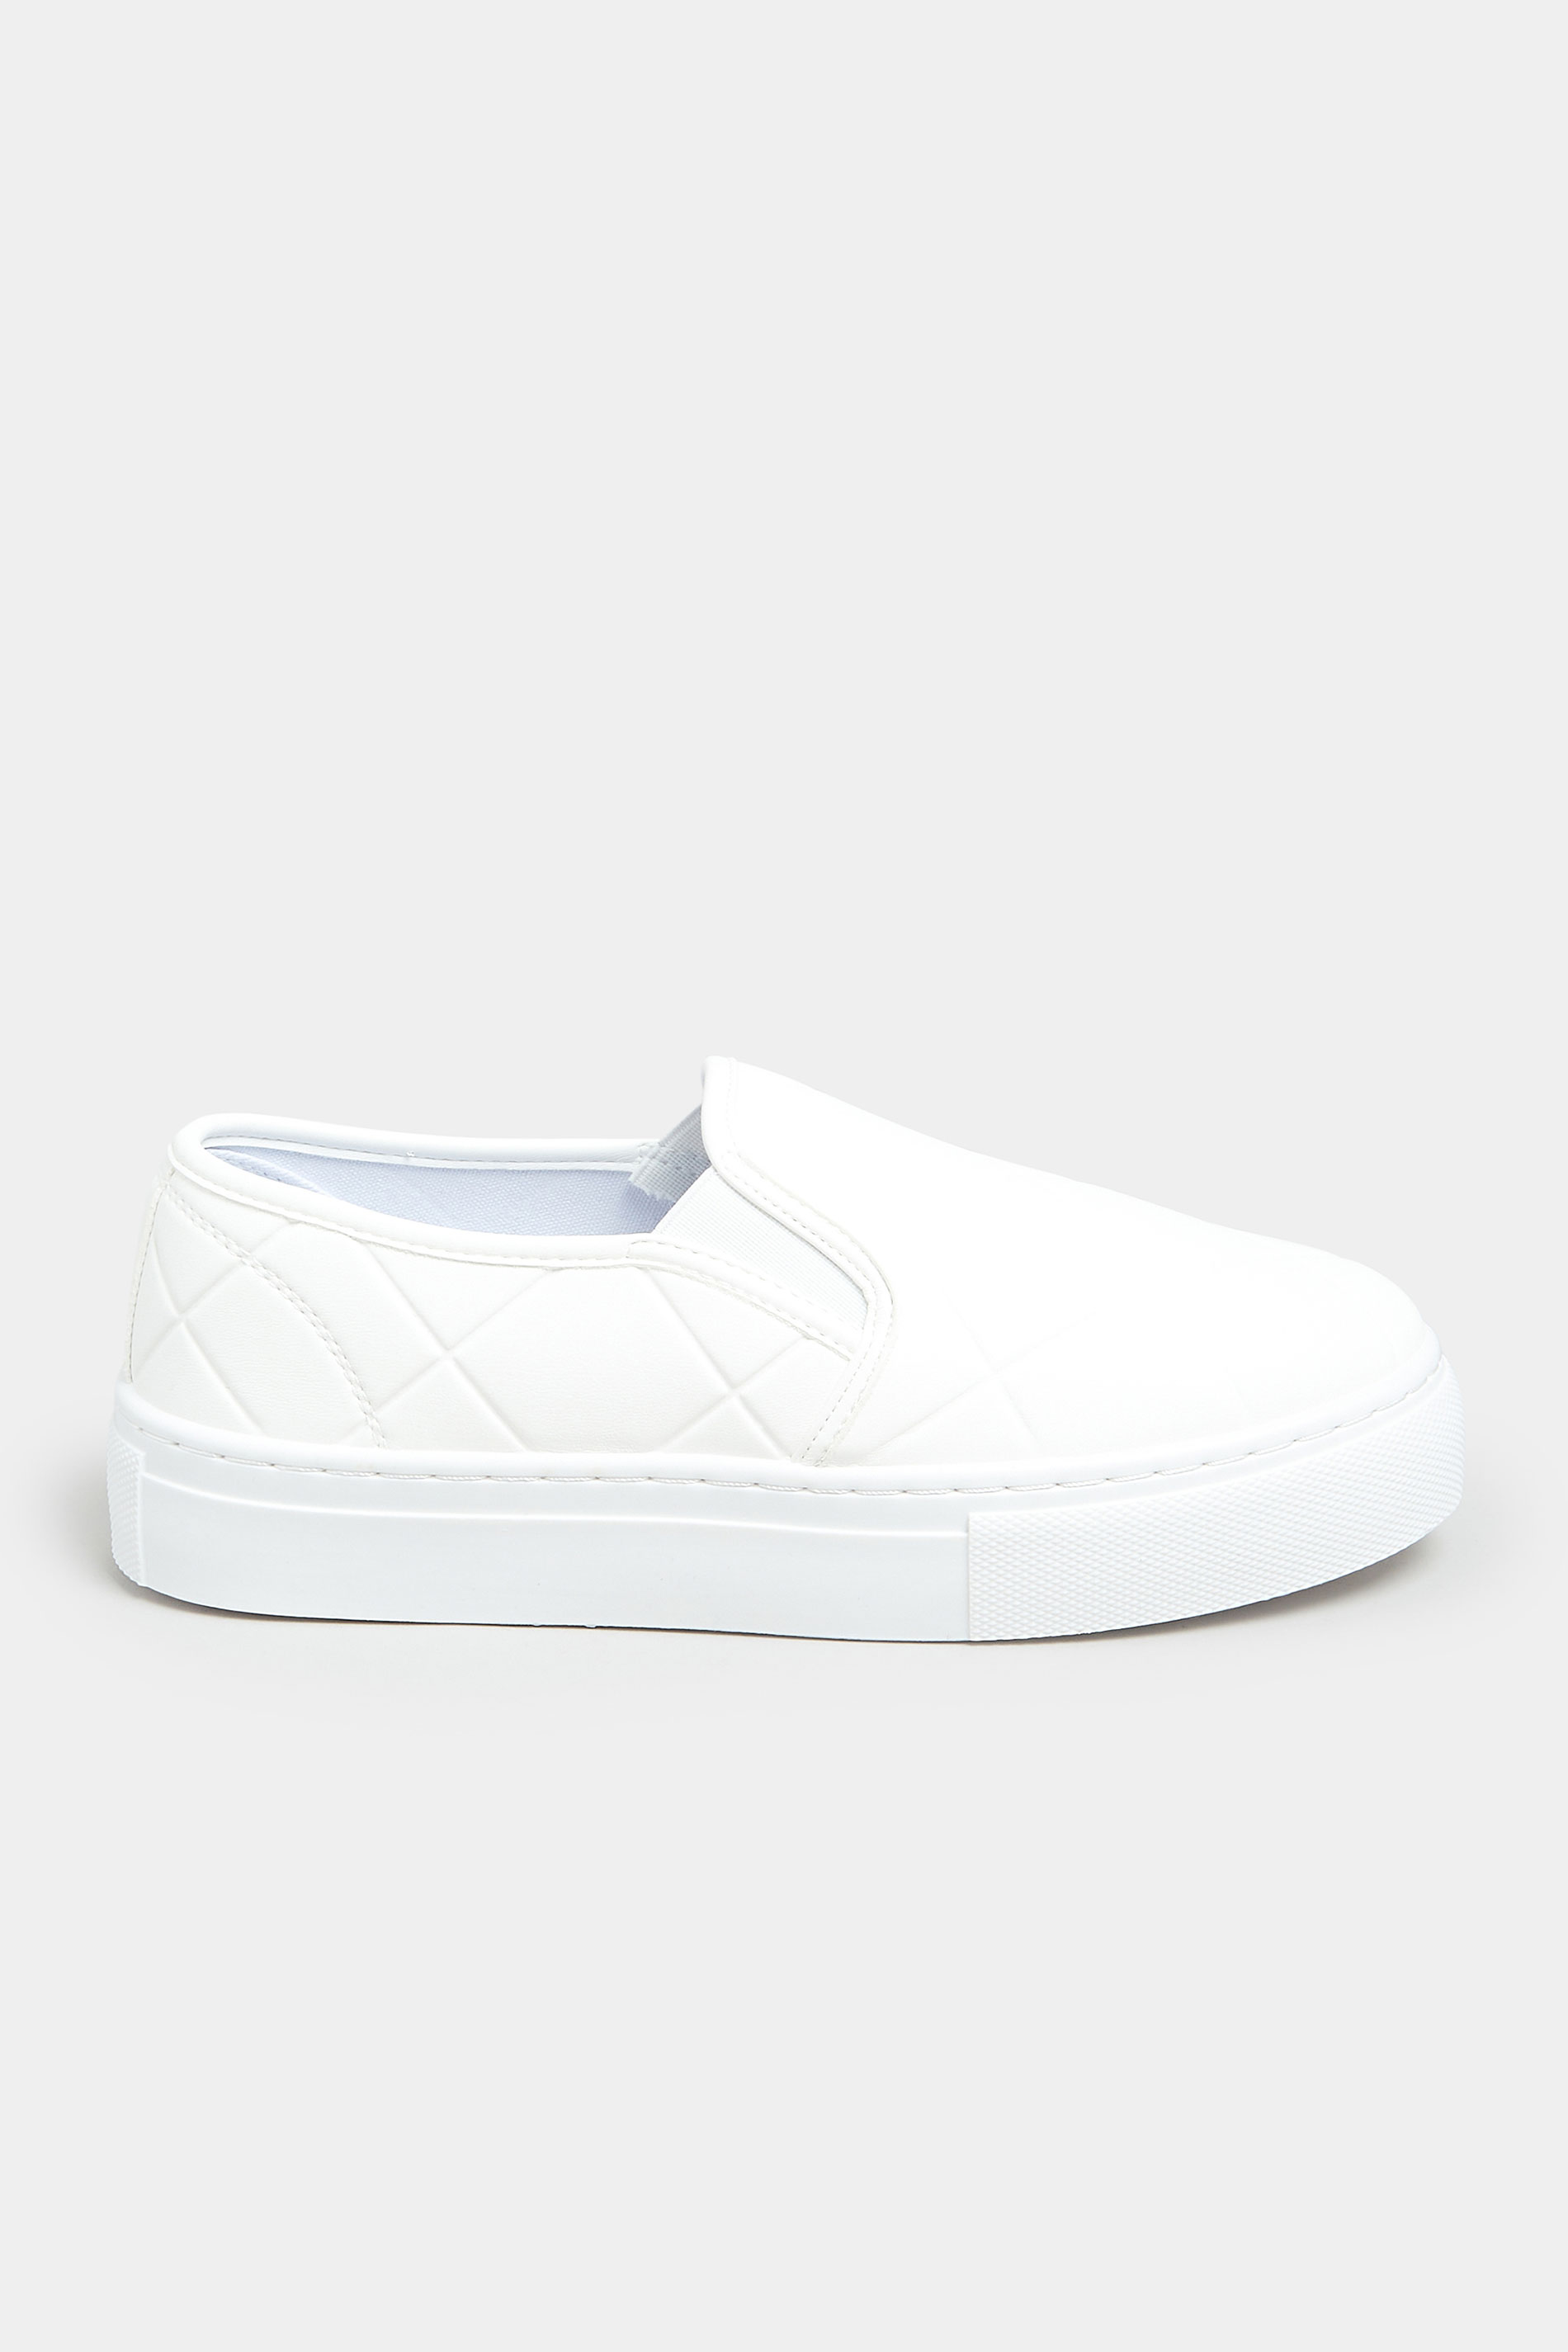 hulp Buskruit roterend White Quilted Slip-On Trainers In Extra Wide Fit | Yours Clothing